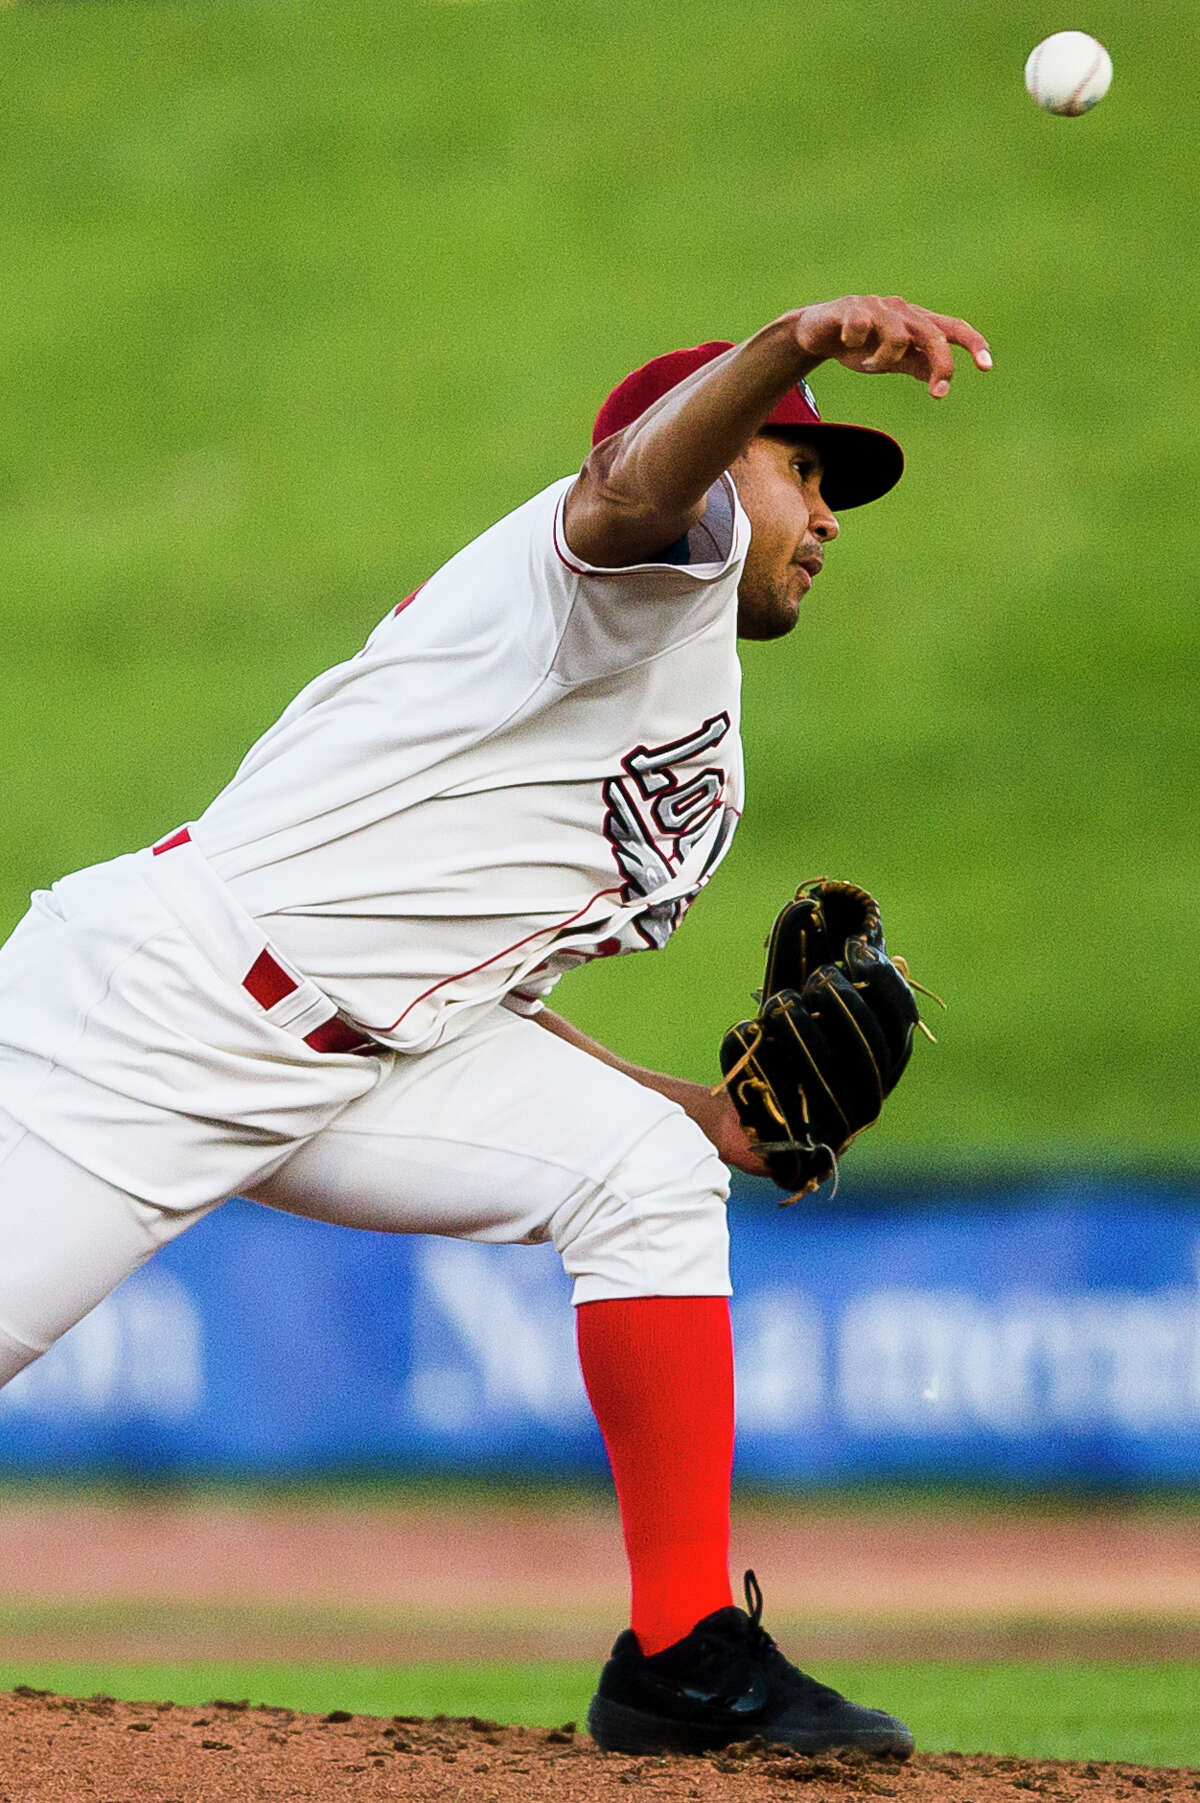 Great Lakes Loons' Jose Martinez pitches the ball during a game against the South Bend Cubs on Monday, June 10, 2019 at Dow Diamond. (Katy Kildee/kkildee@mdn.net)